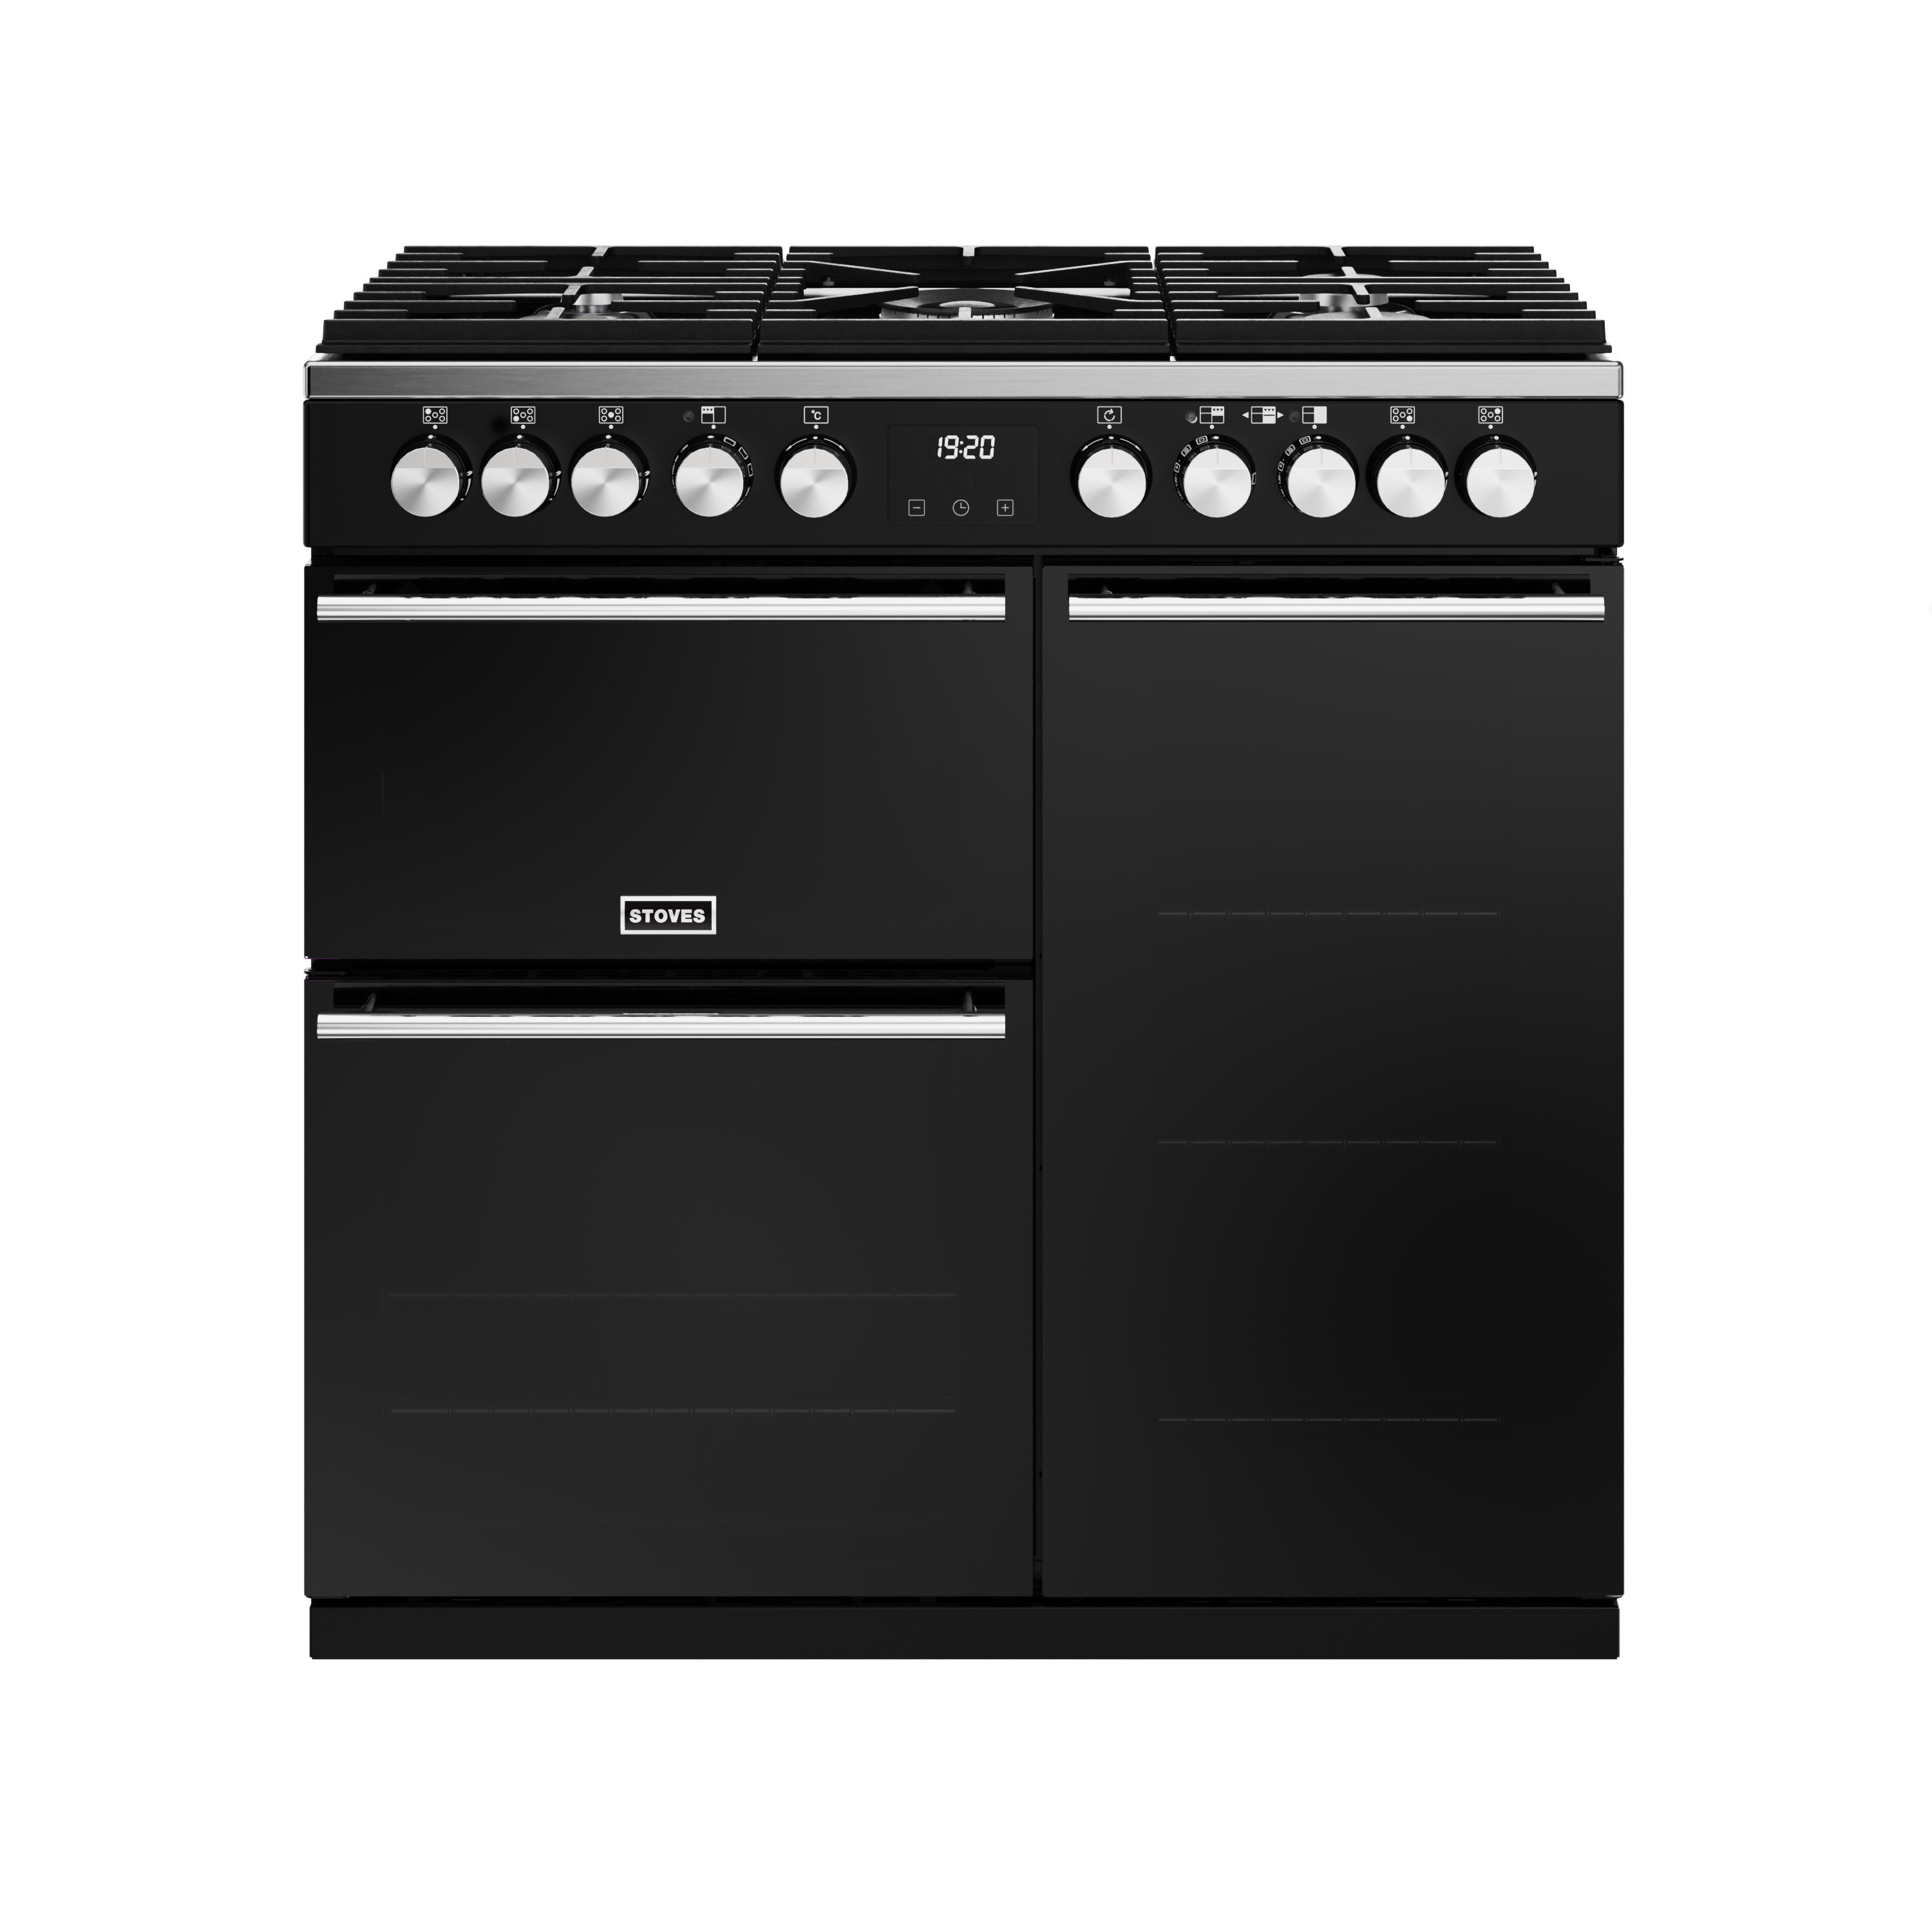 90cm dual fuel range cooker with a 5 burner gas hob, conventional oven & grill, multifunction main oven with TrueTemp digital thermostat, and tall fanned oven with PROFLEX™